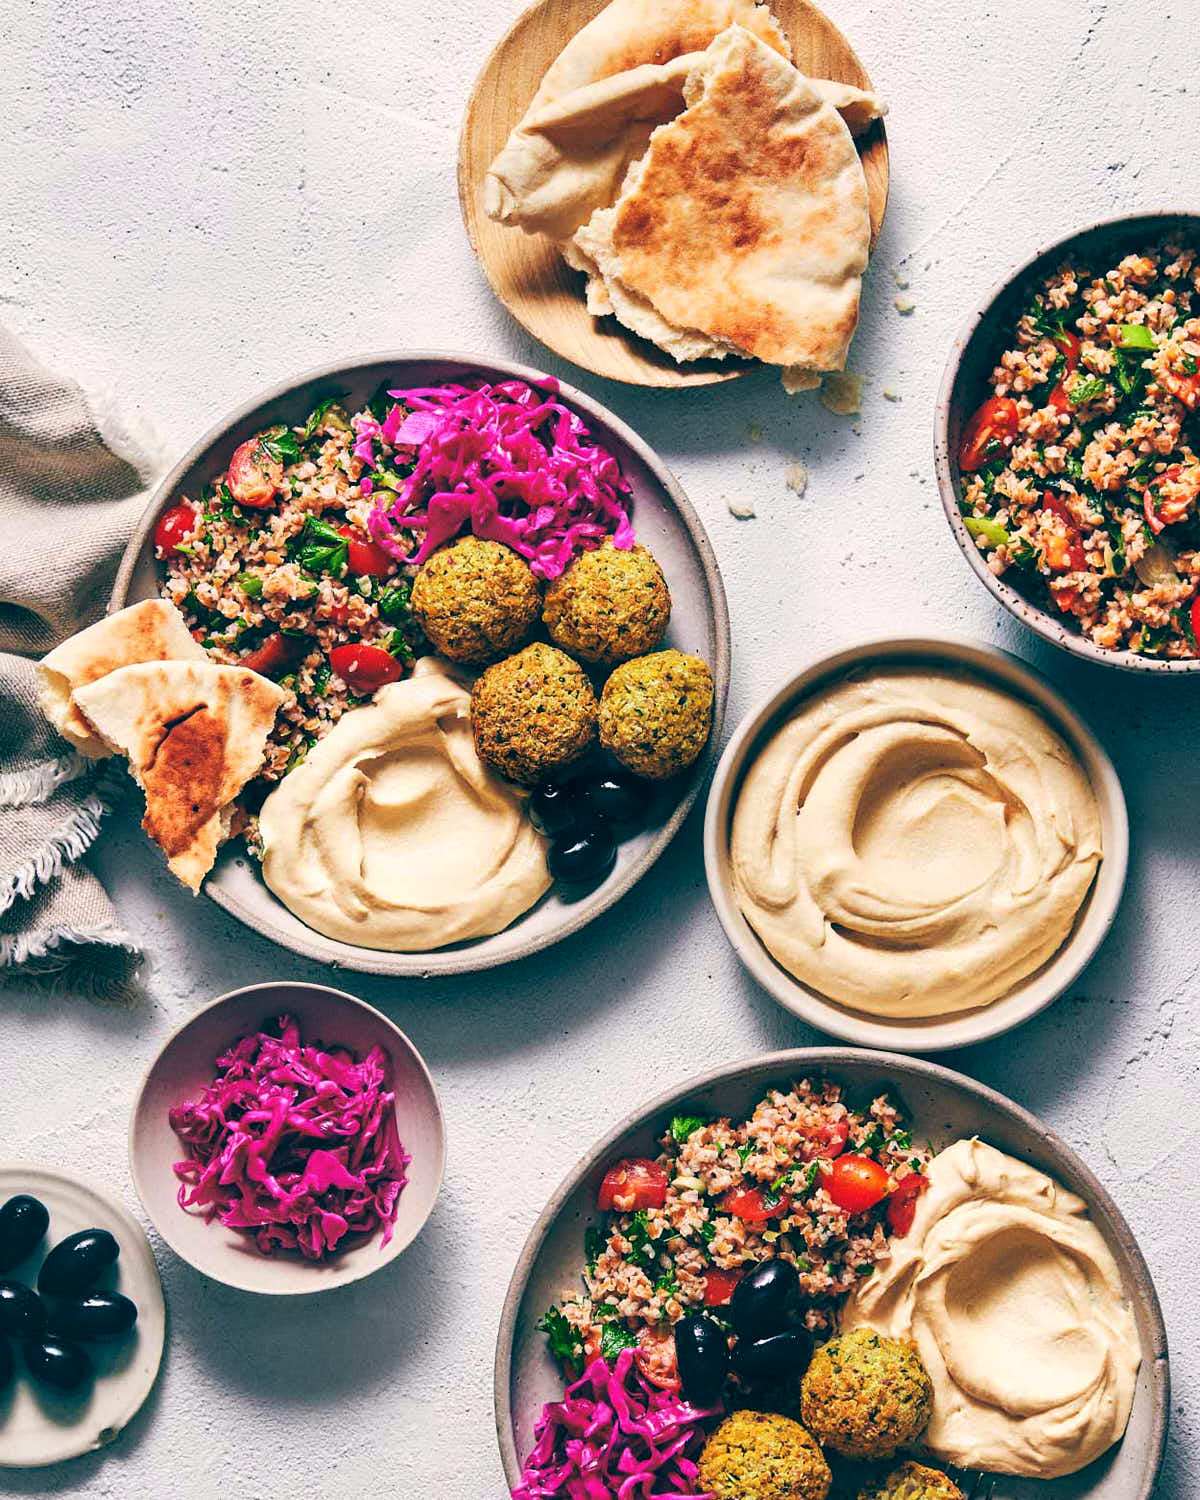 Plate of falafel with hummus, pita and pickled red cabbage